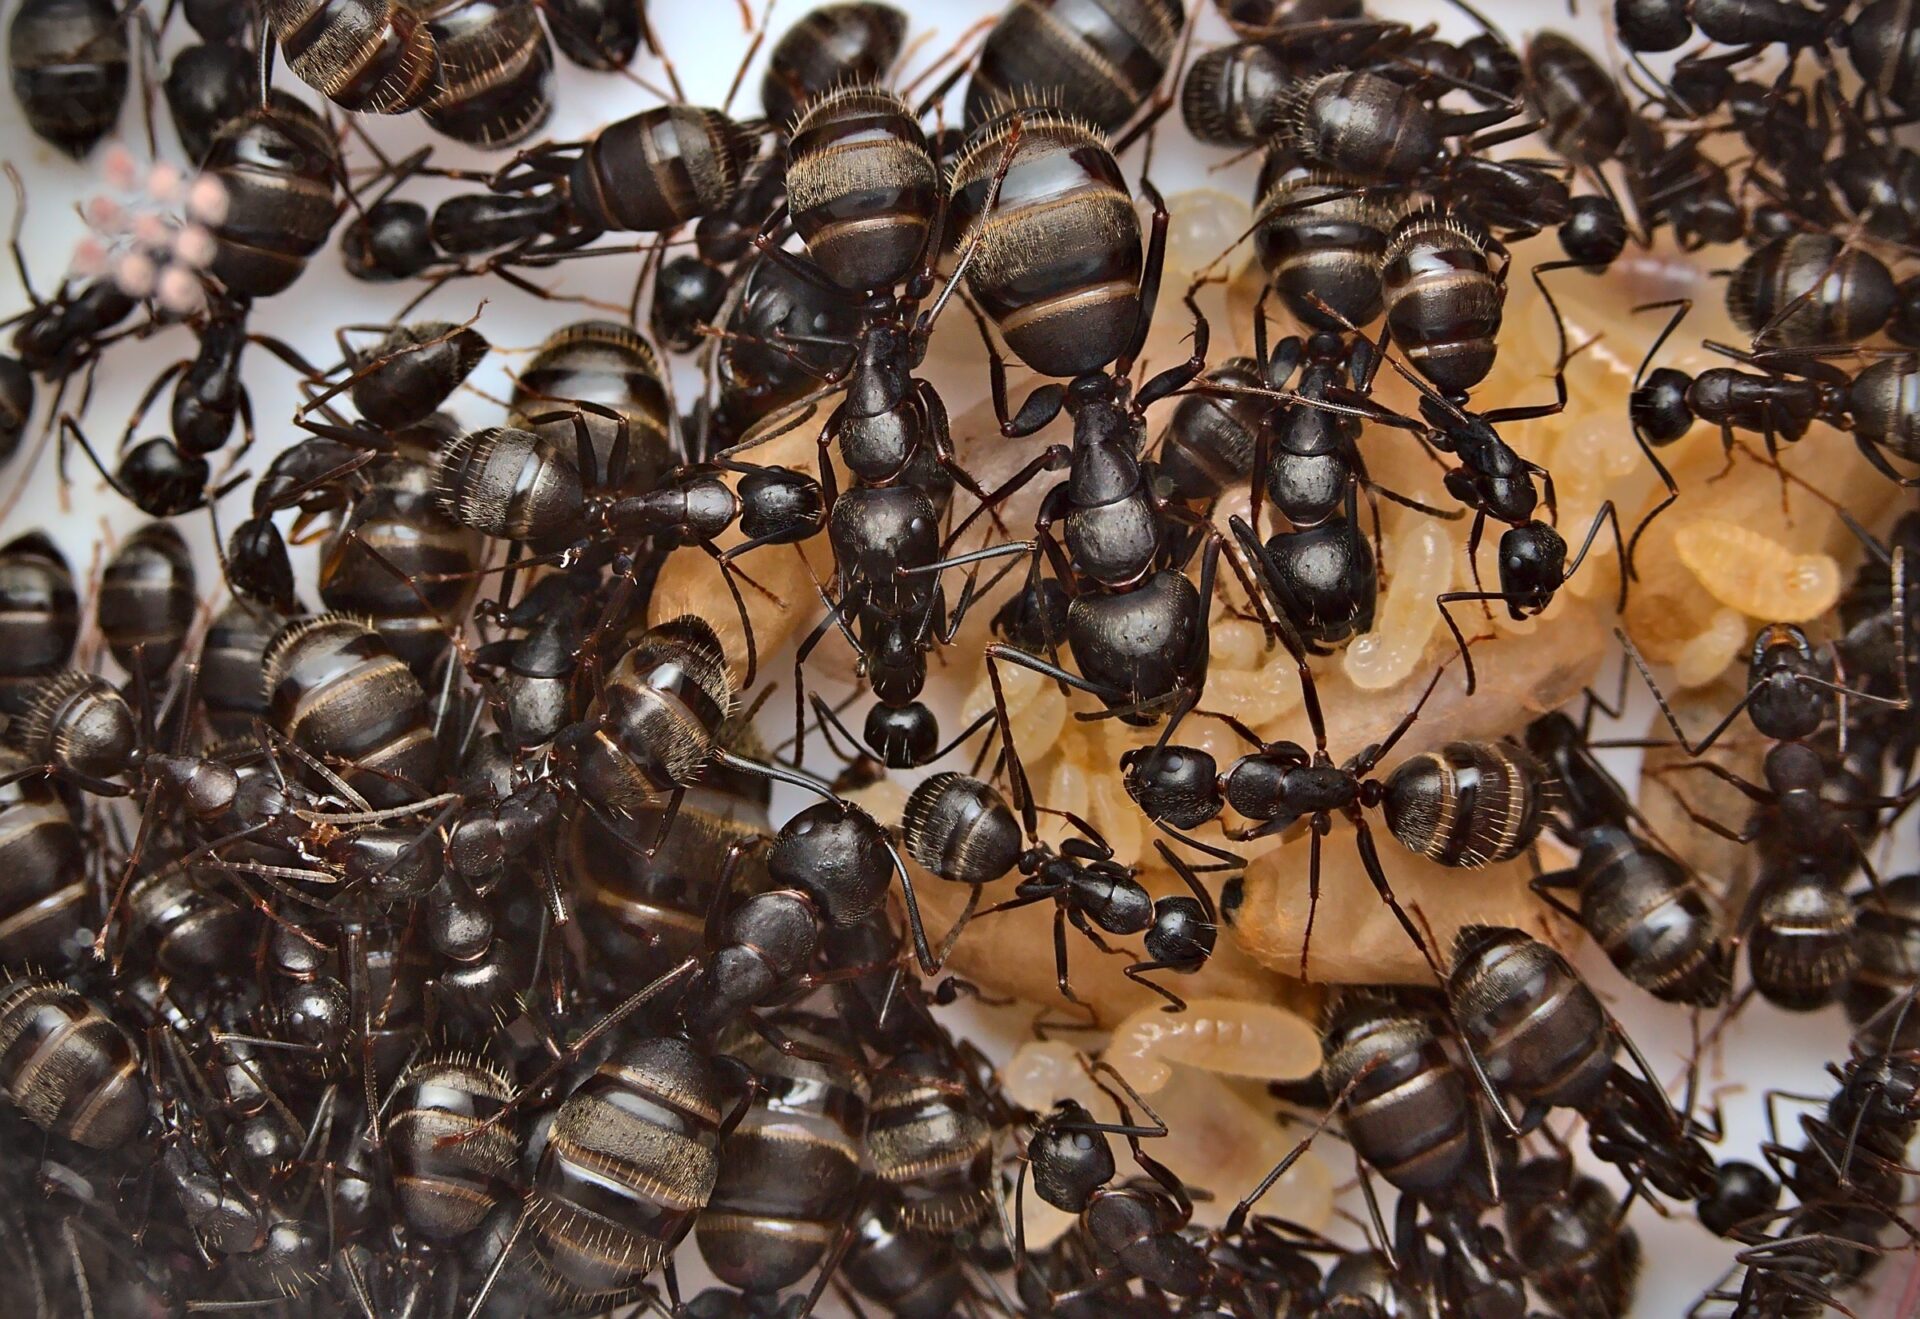 Camponotus pennsylvanicus workers caring for their brood.